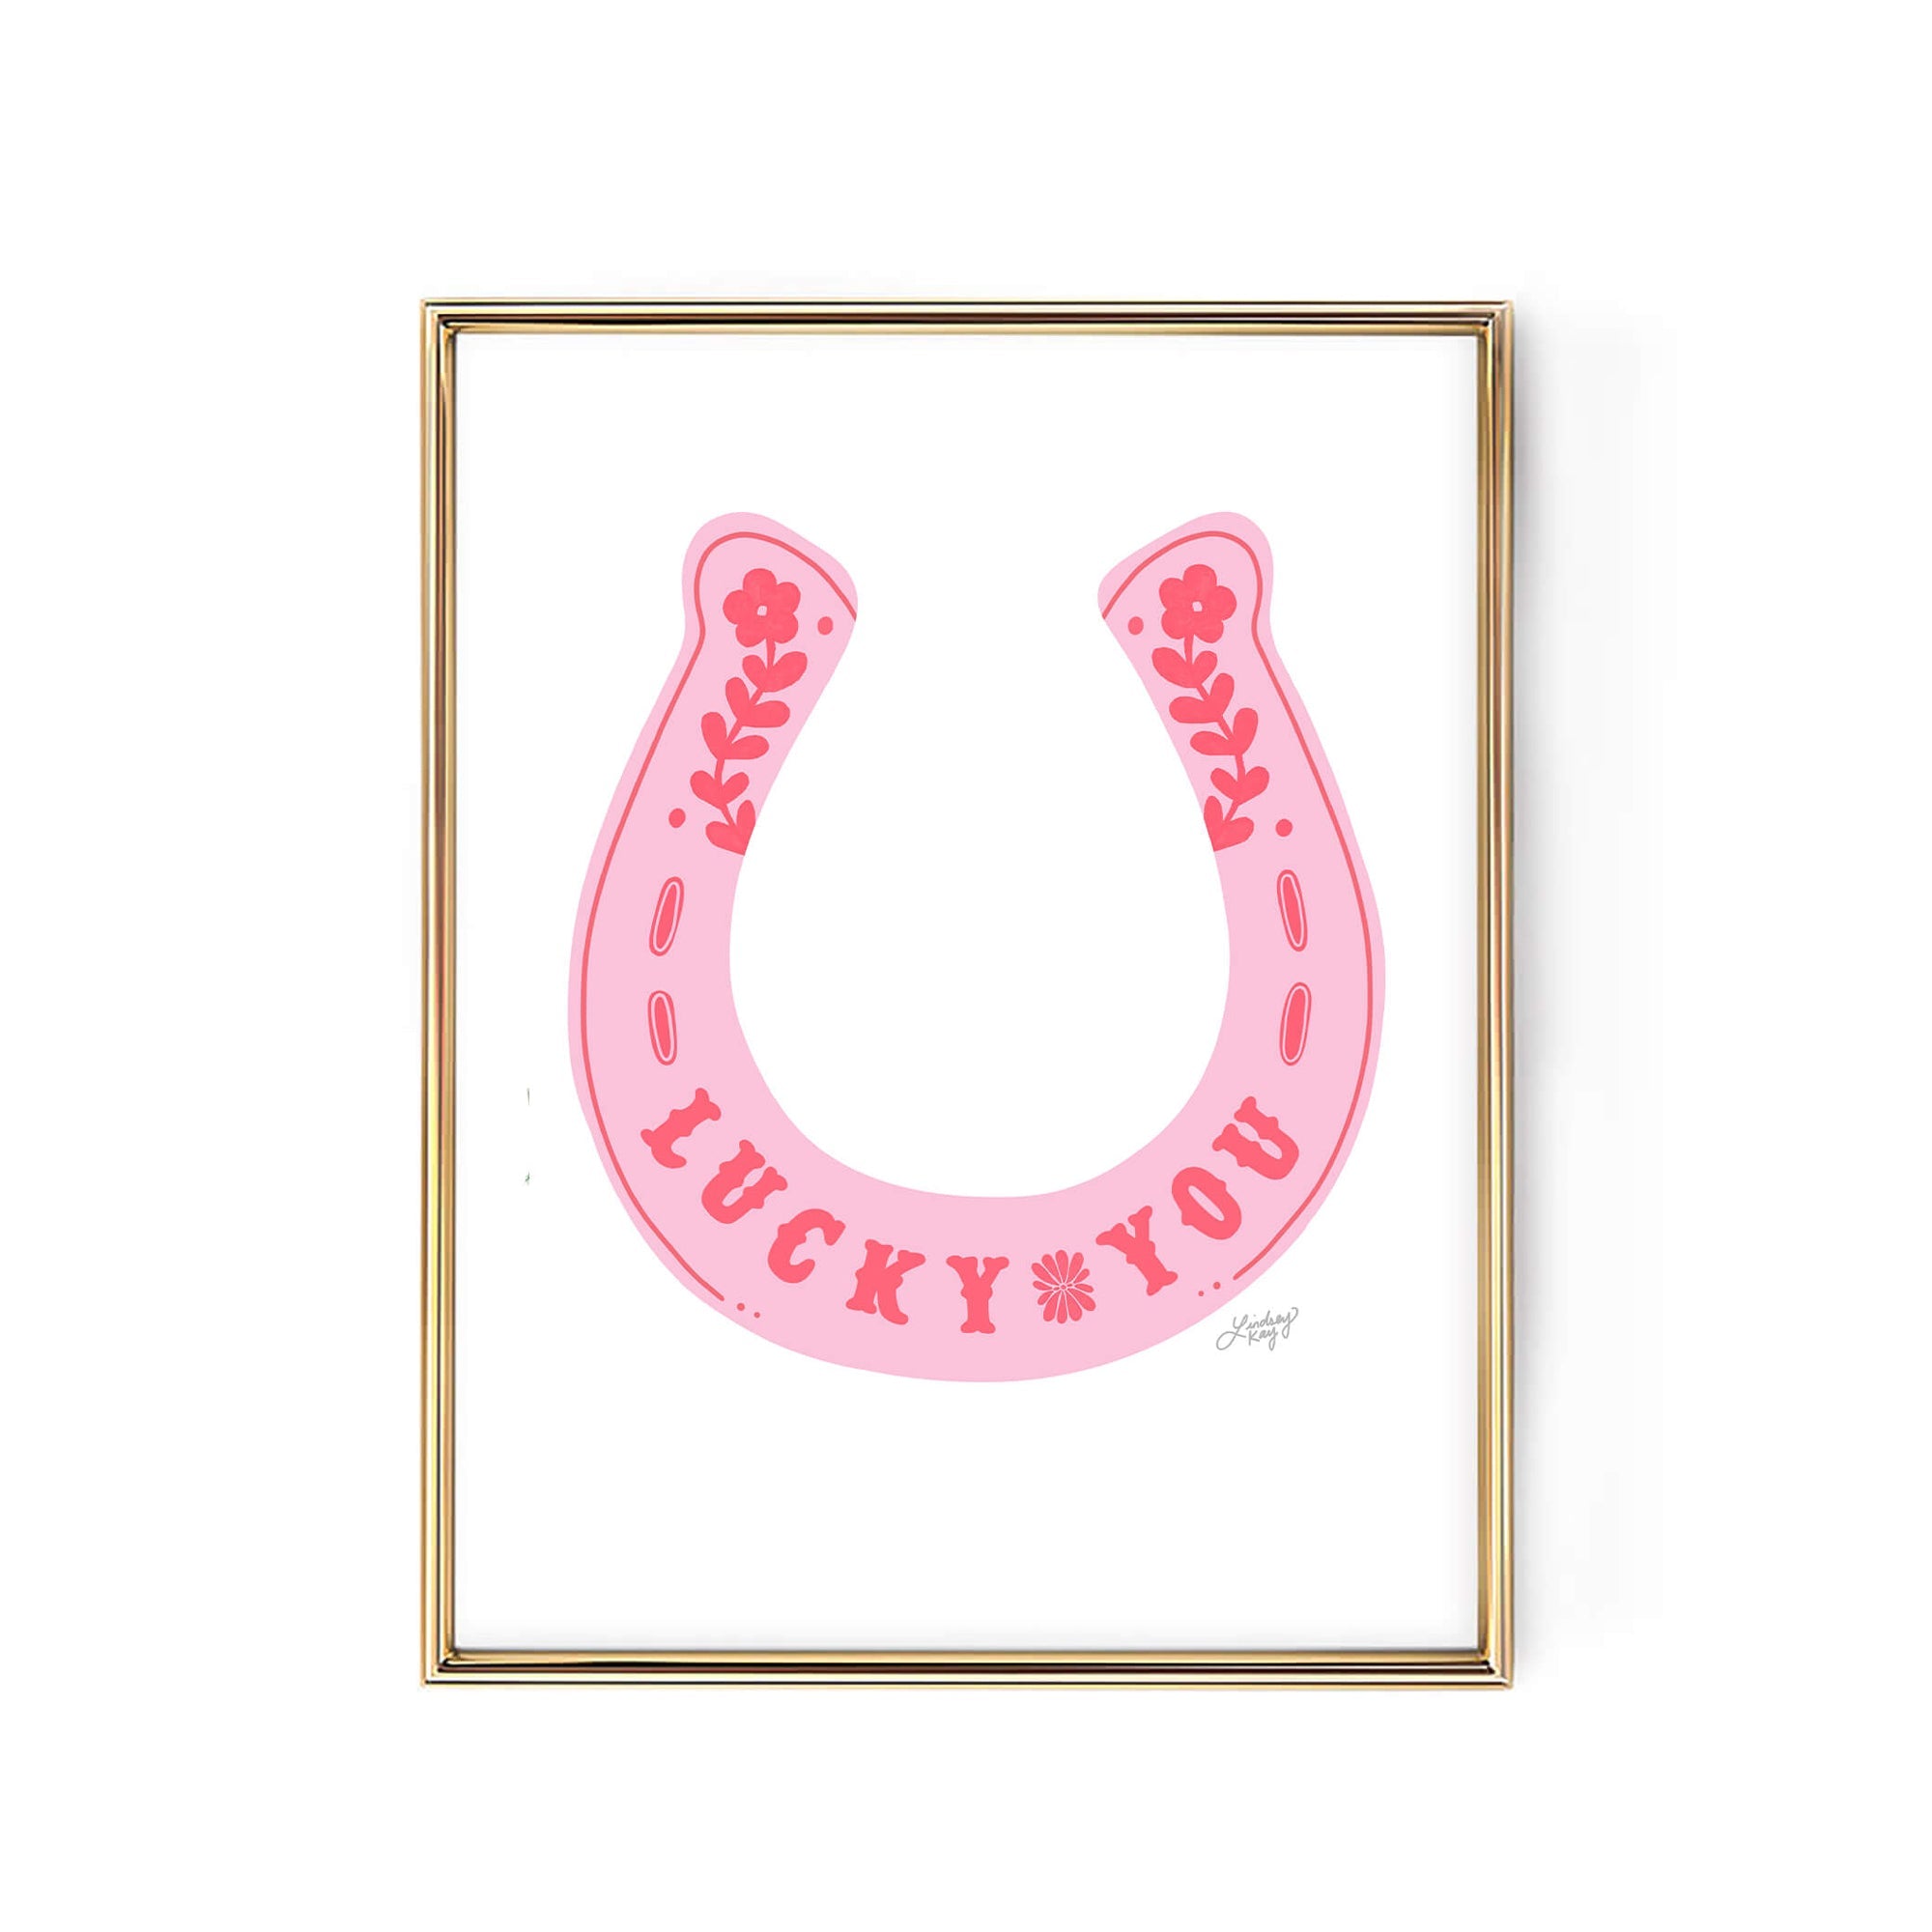 Lucky you pink horseshoe illustration art print poster western country lindsey kay collective